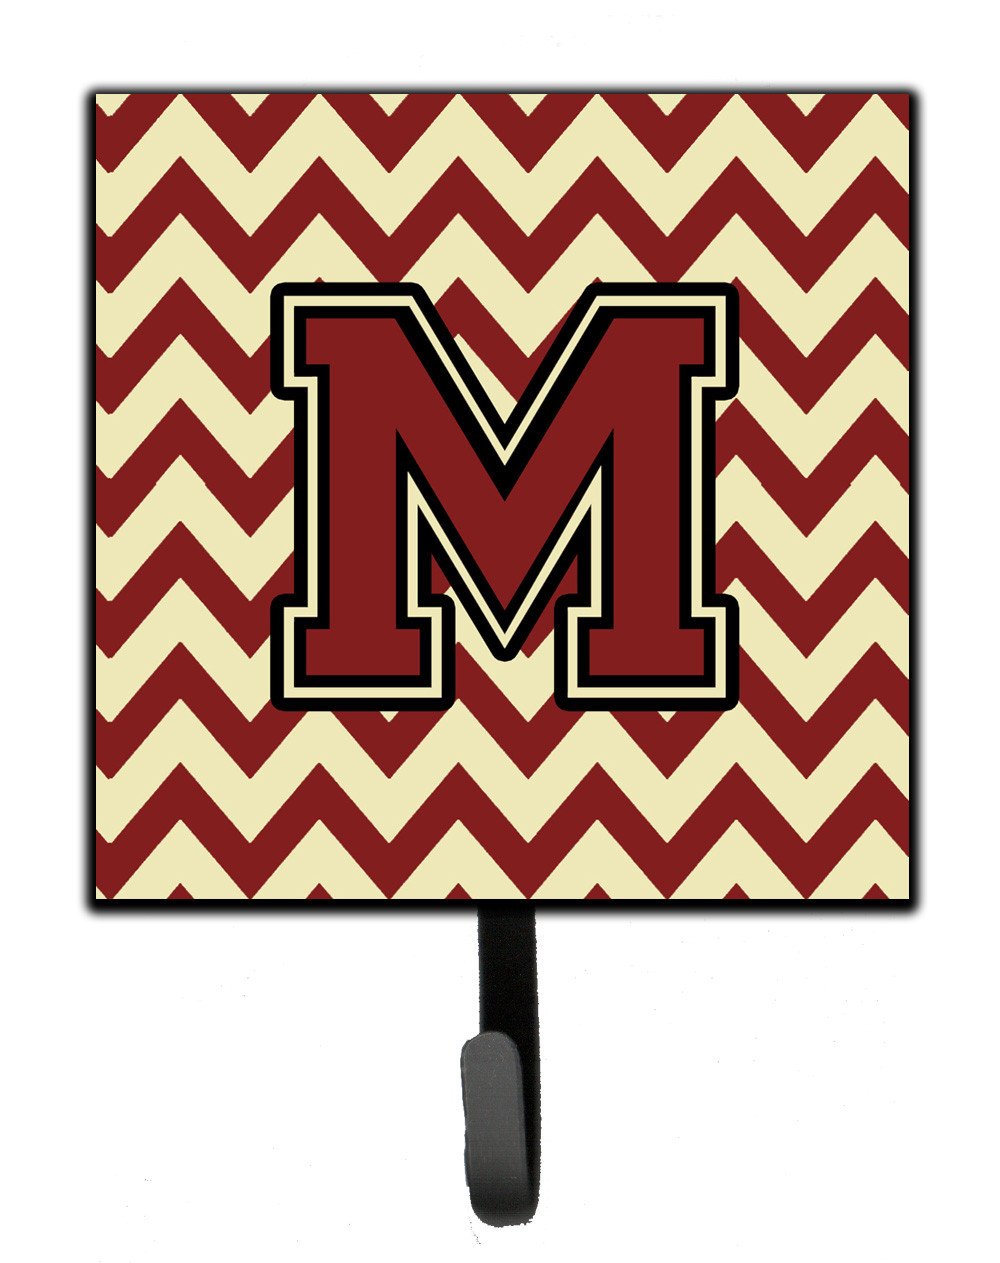 Letter M Chevron Maroon and Gold Leash or Key Holder CJ1061-MSH4 by Caroline's Treasures